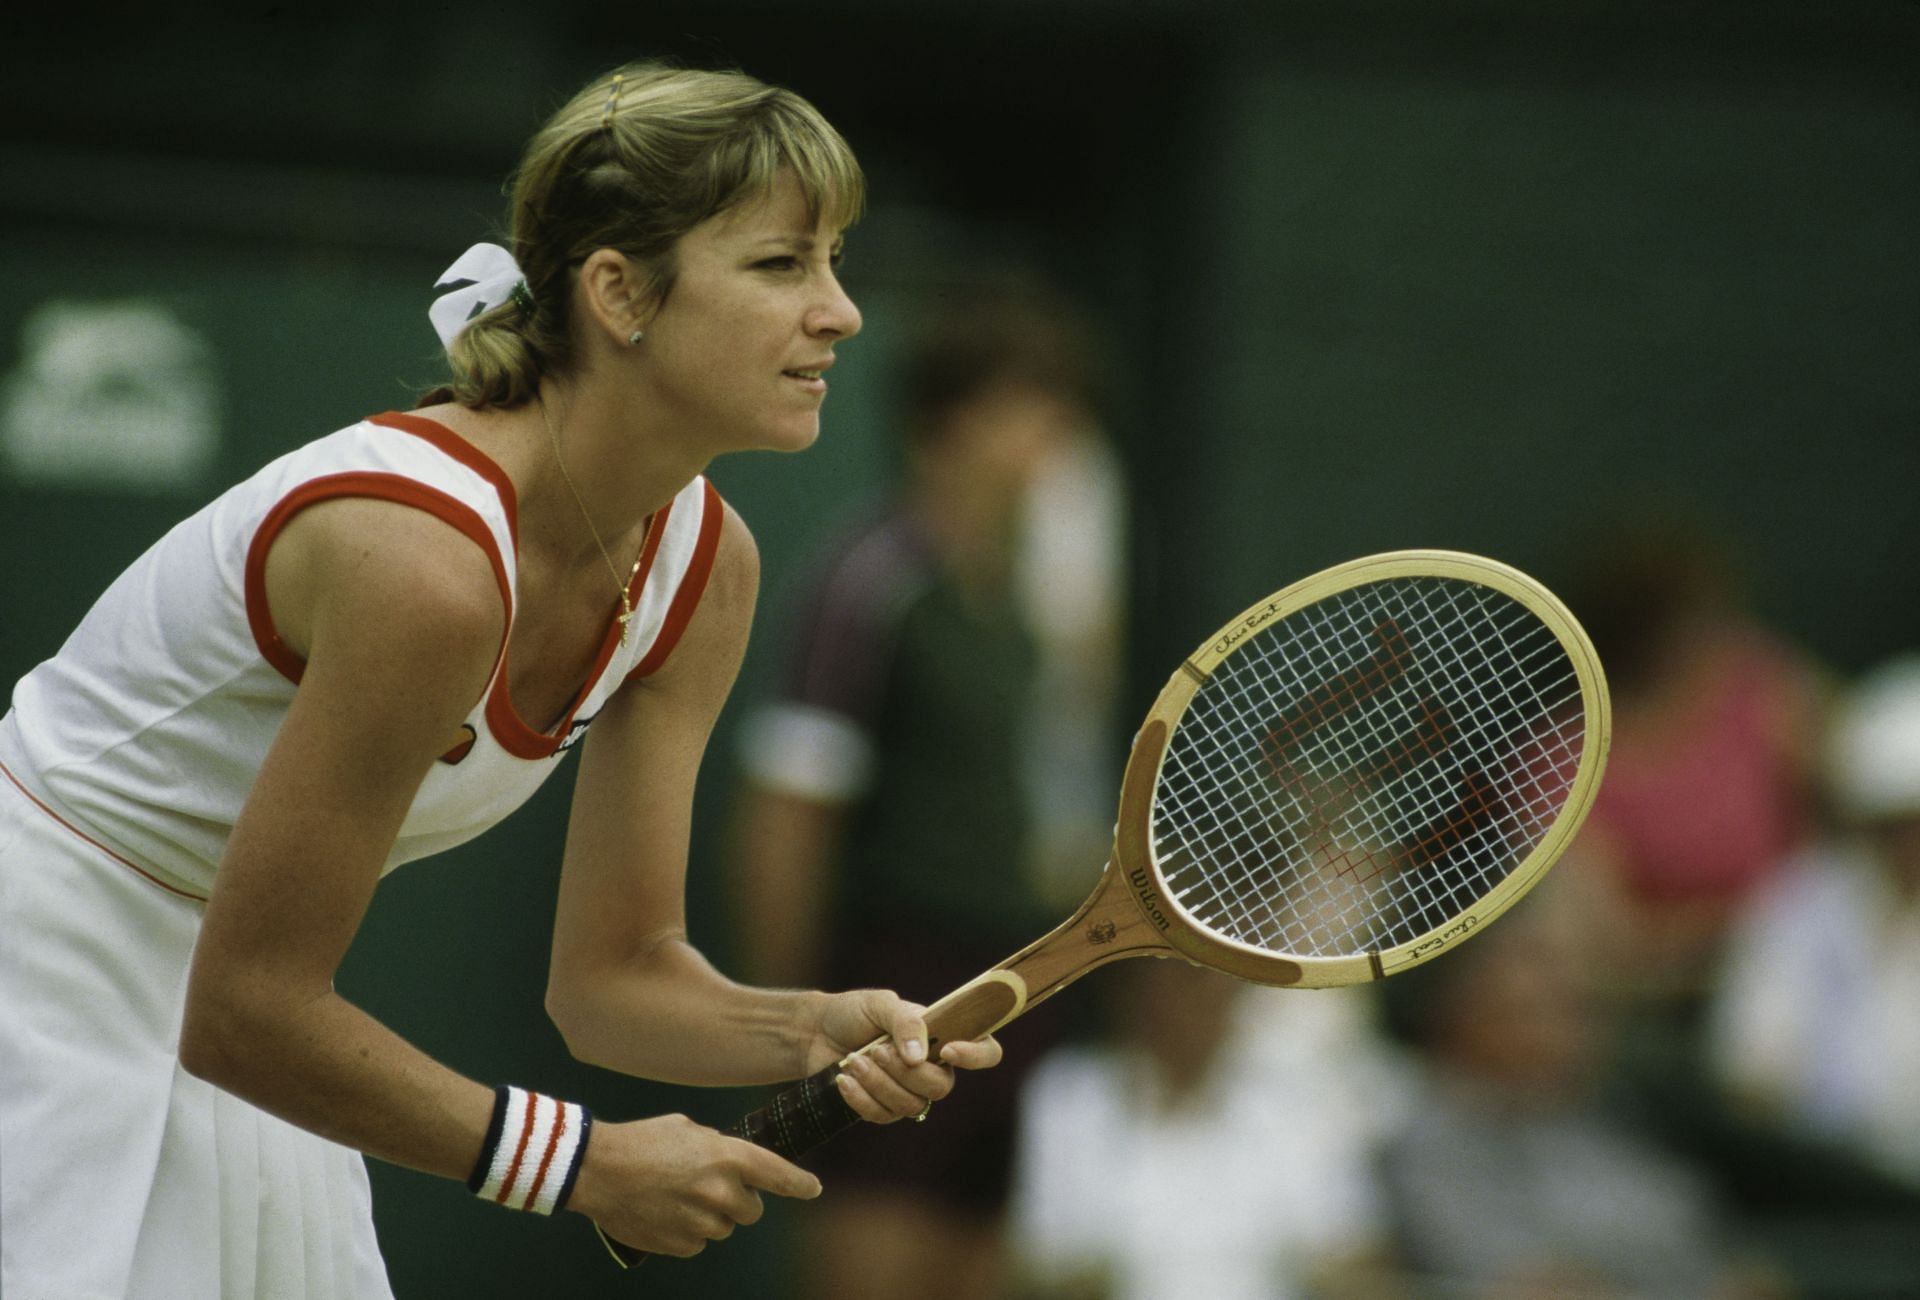 Chris Evert in action at the 1982 Wimbledon Championships.